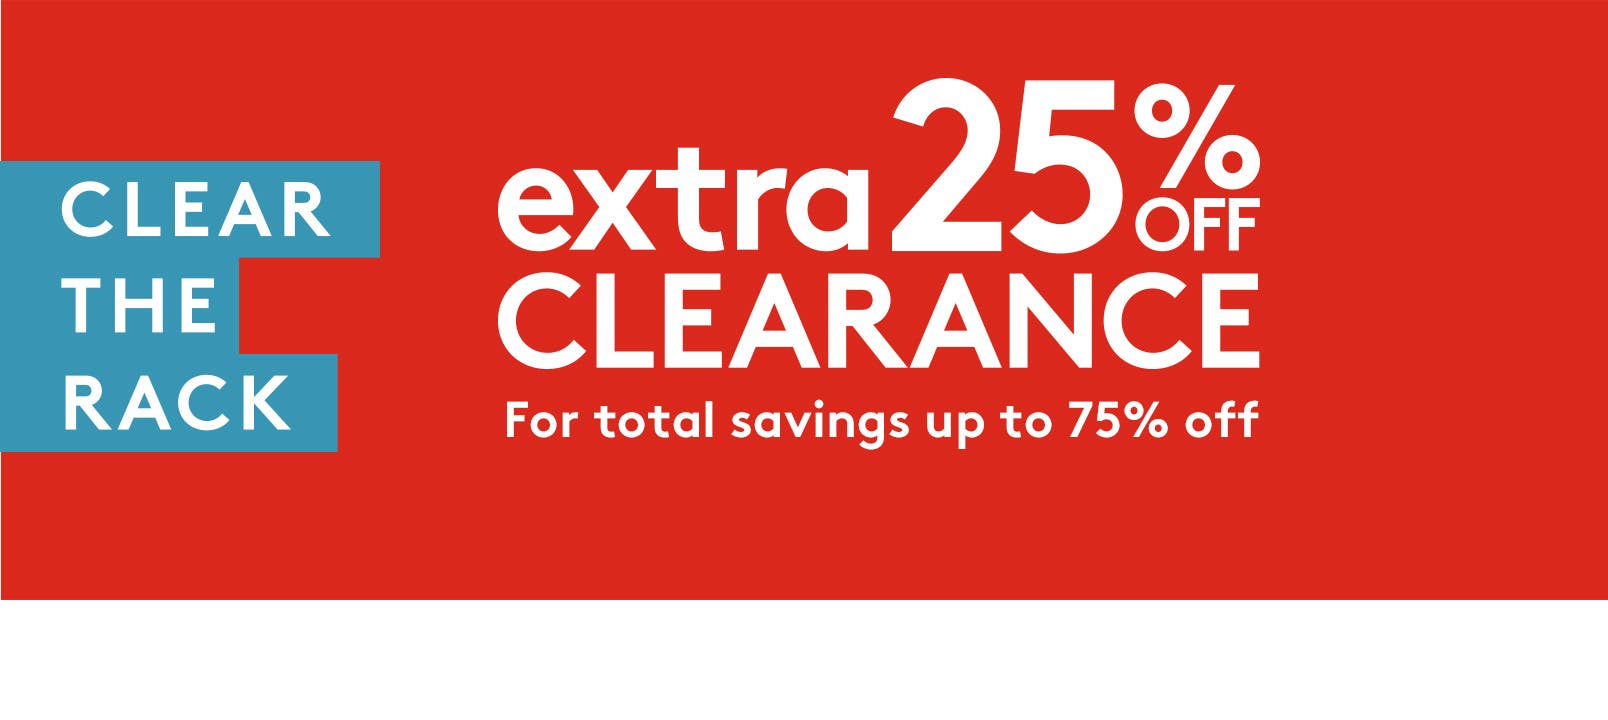 Clear the Rack: extra twenty five percent off selected clearance for total savings up to seventy five percent off